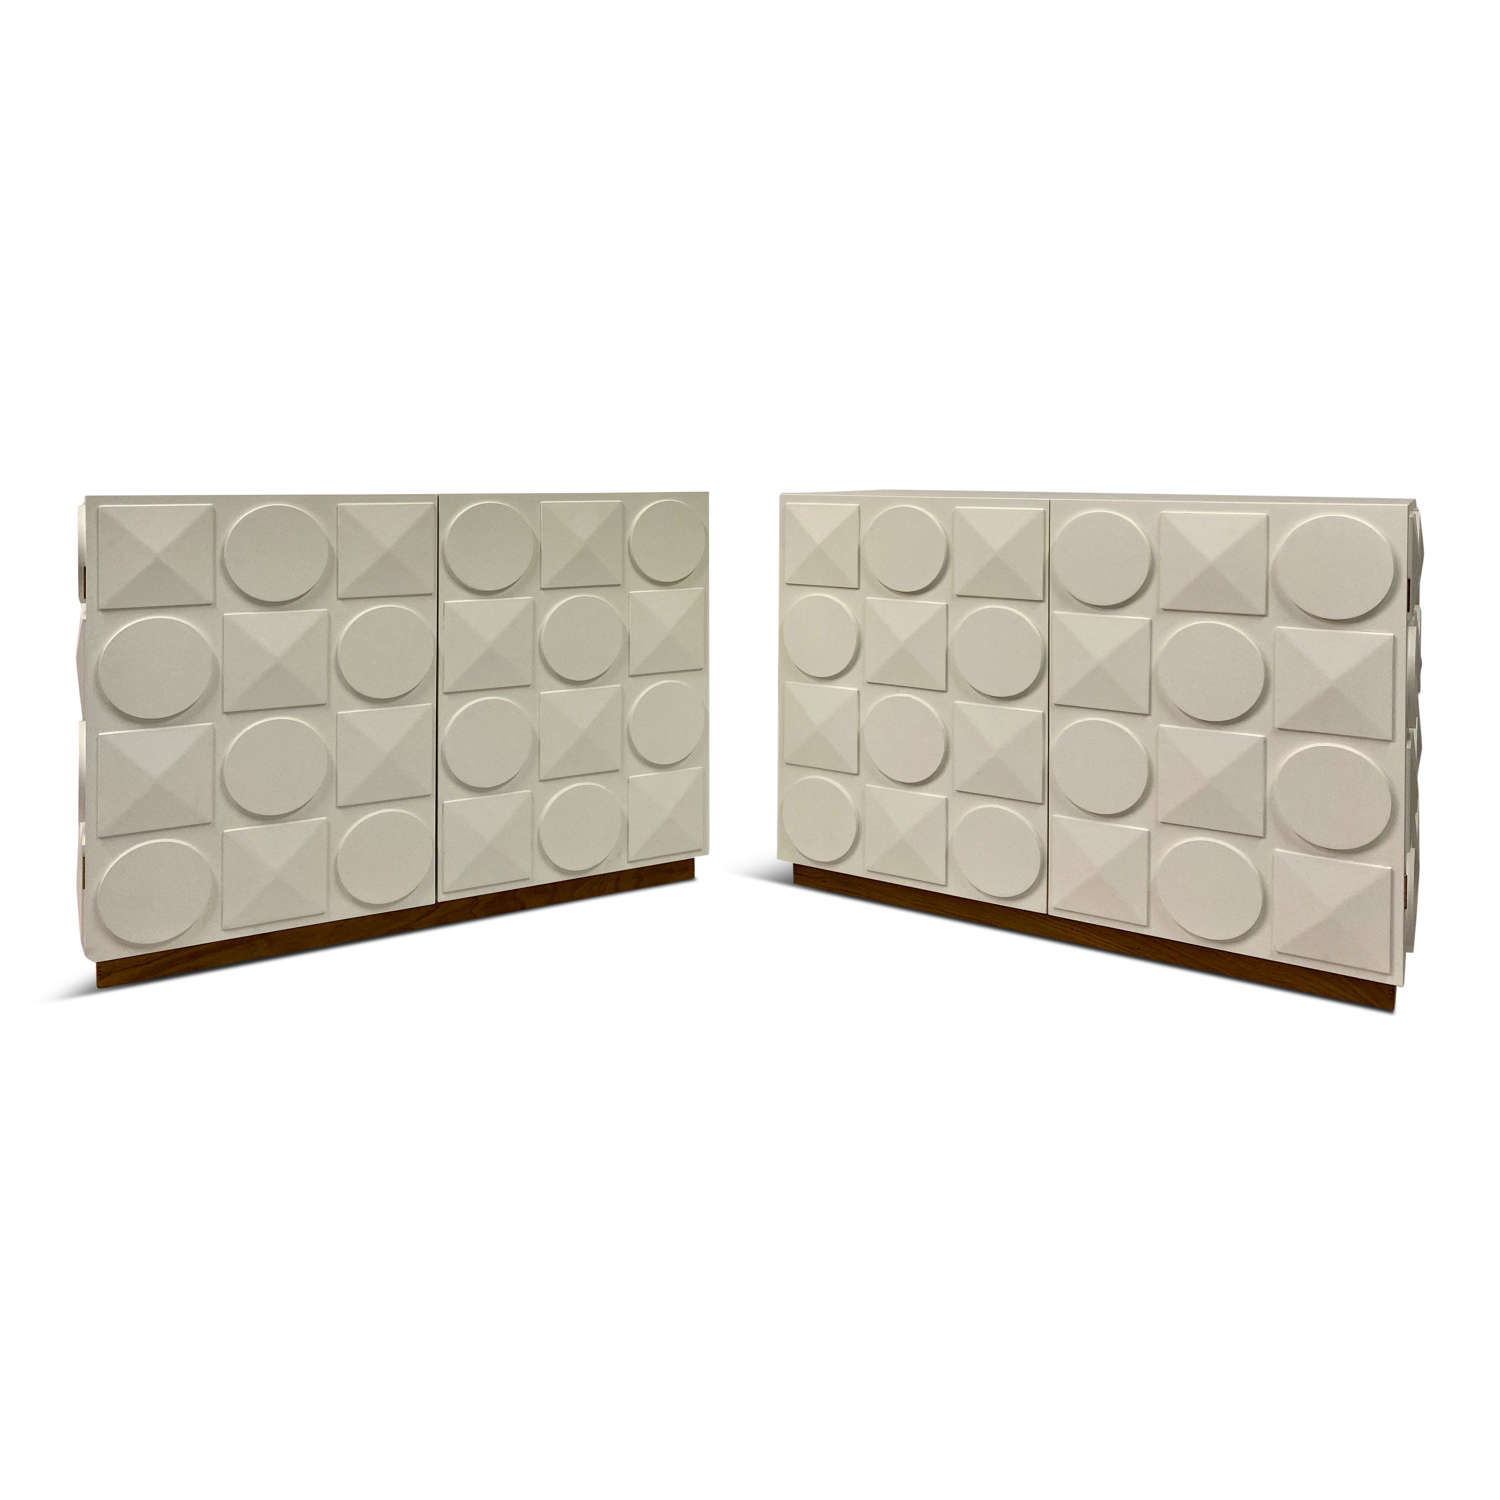 Pair of White Postmodern Style Cabinets